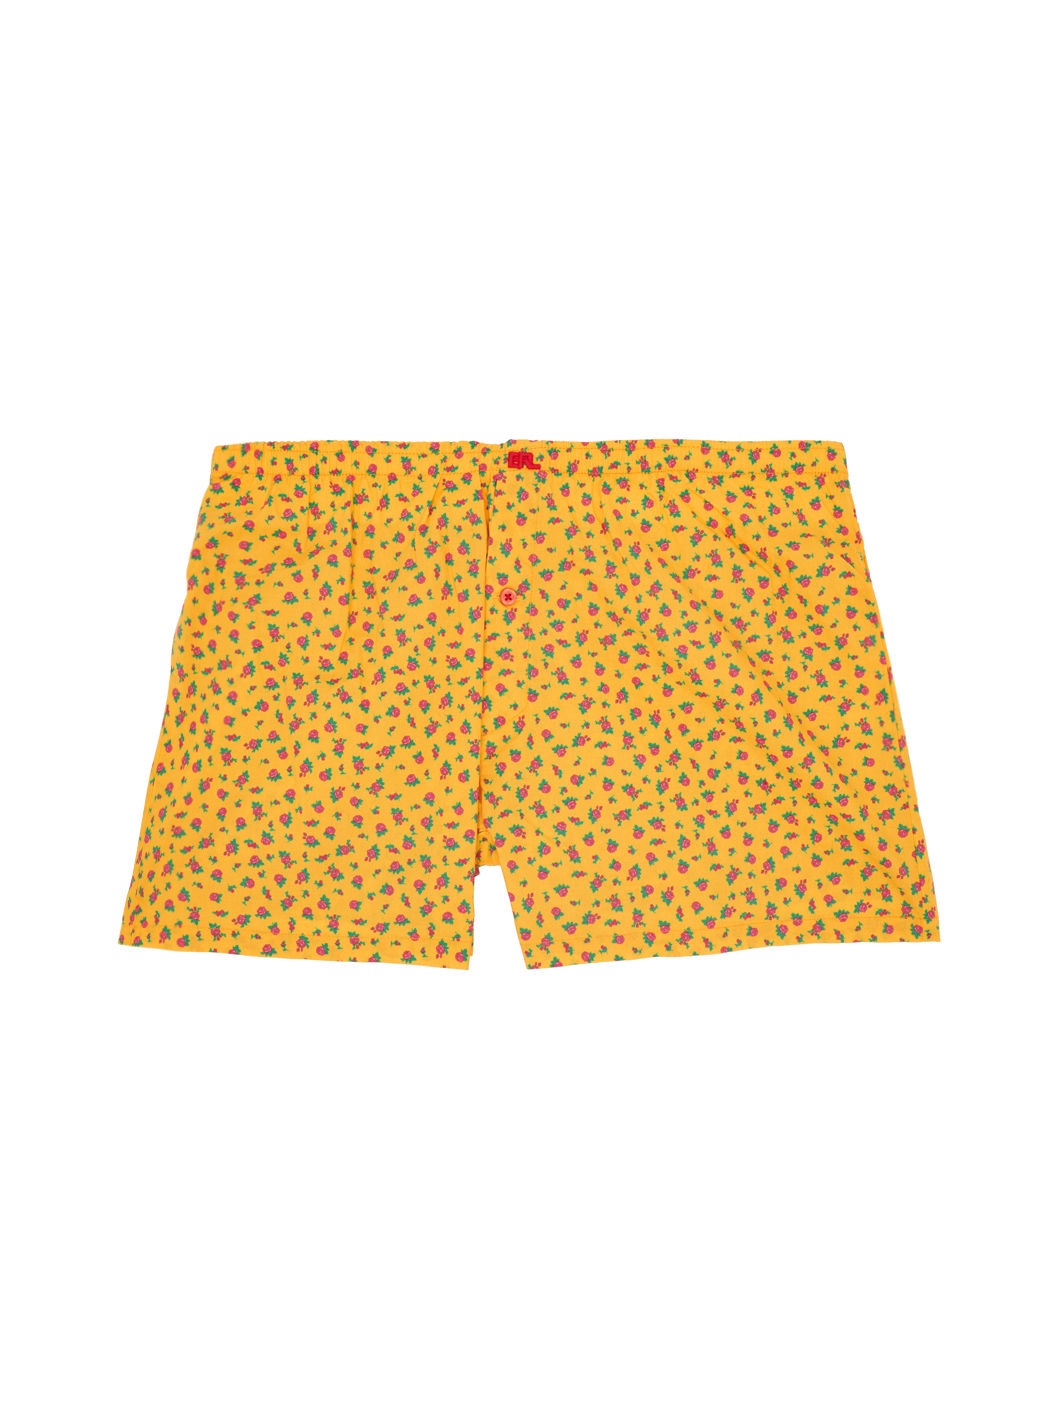 Yellow Floral Boxers - 1